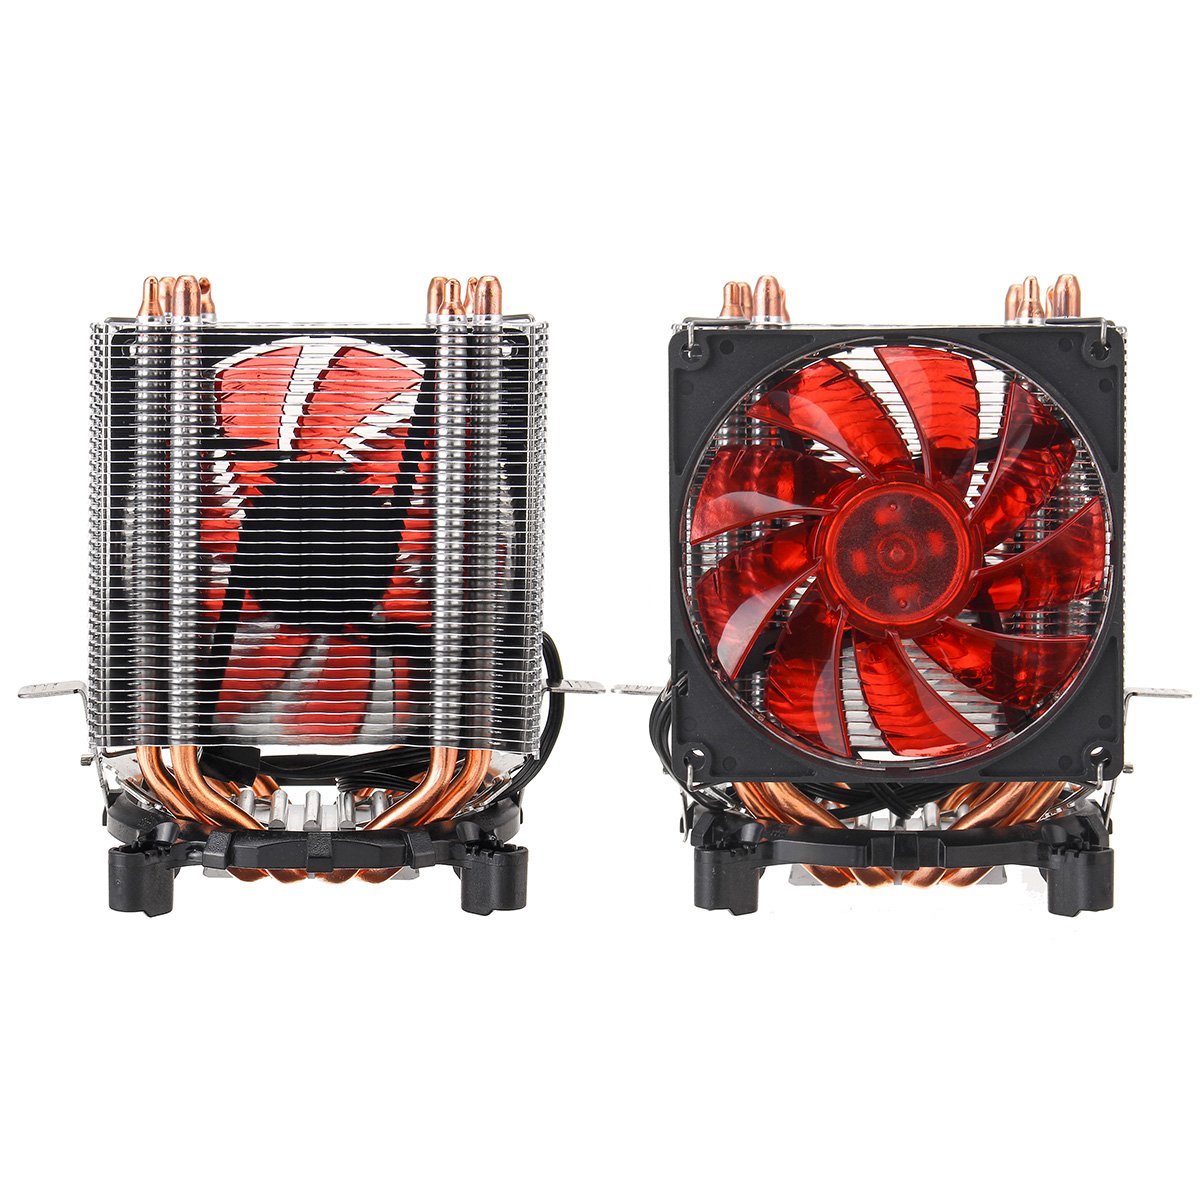 3 Pin Four Copper Pipes Red Backlit CPU Cooling Fan for Intel 1155 1156 AMD 1